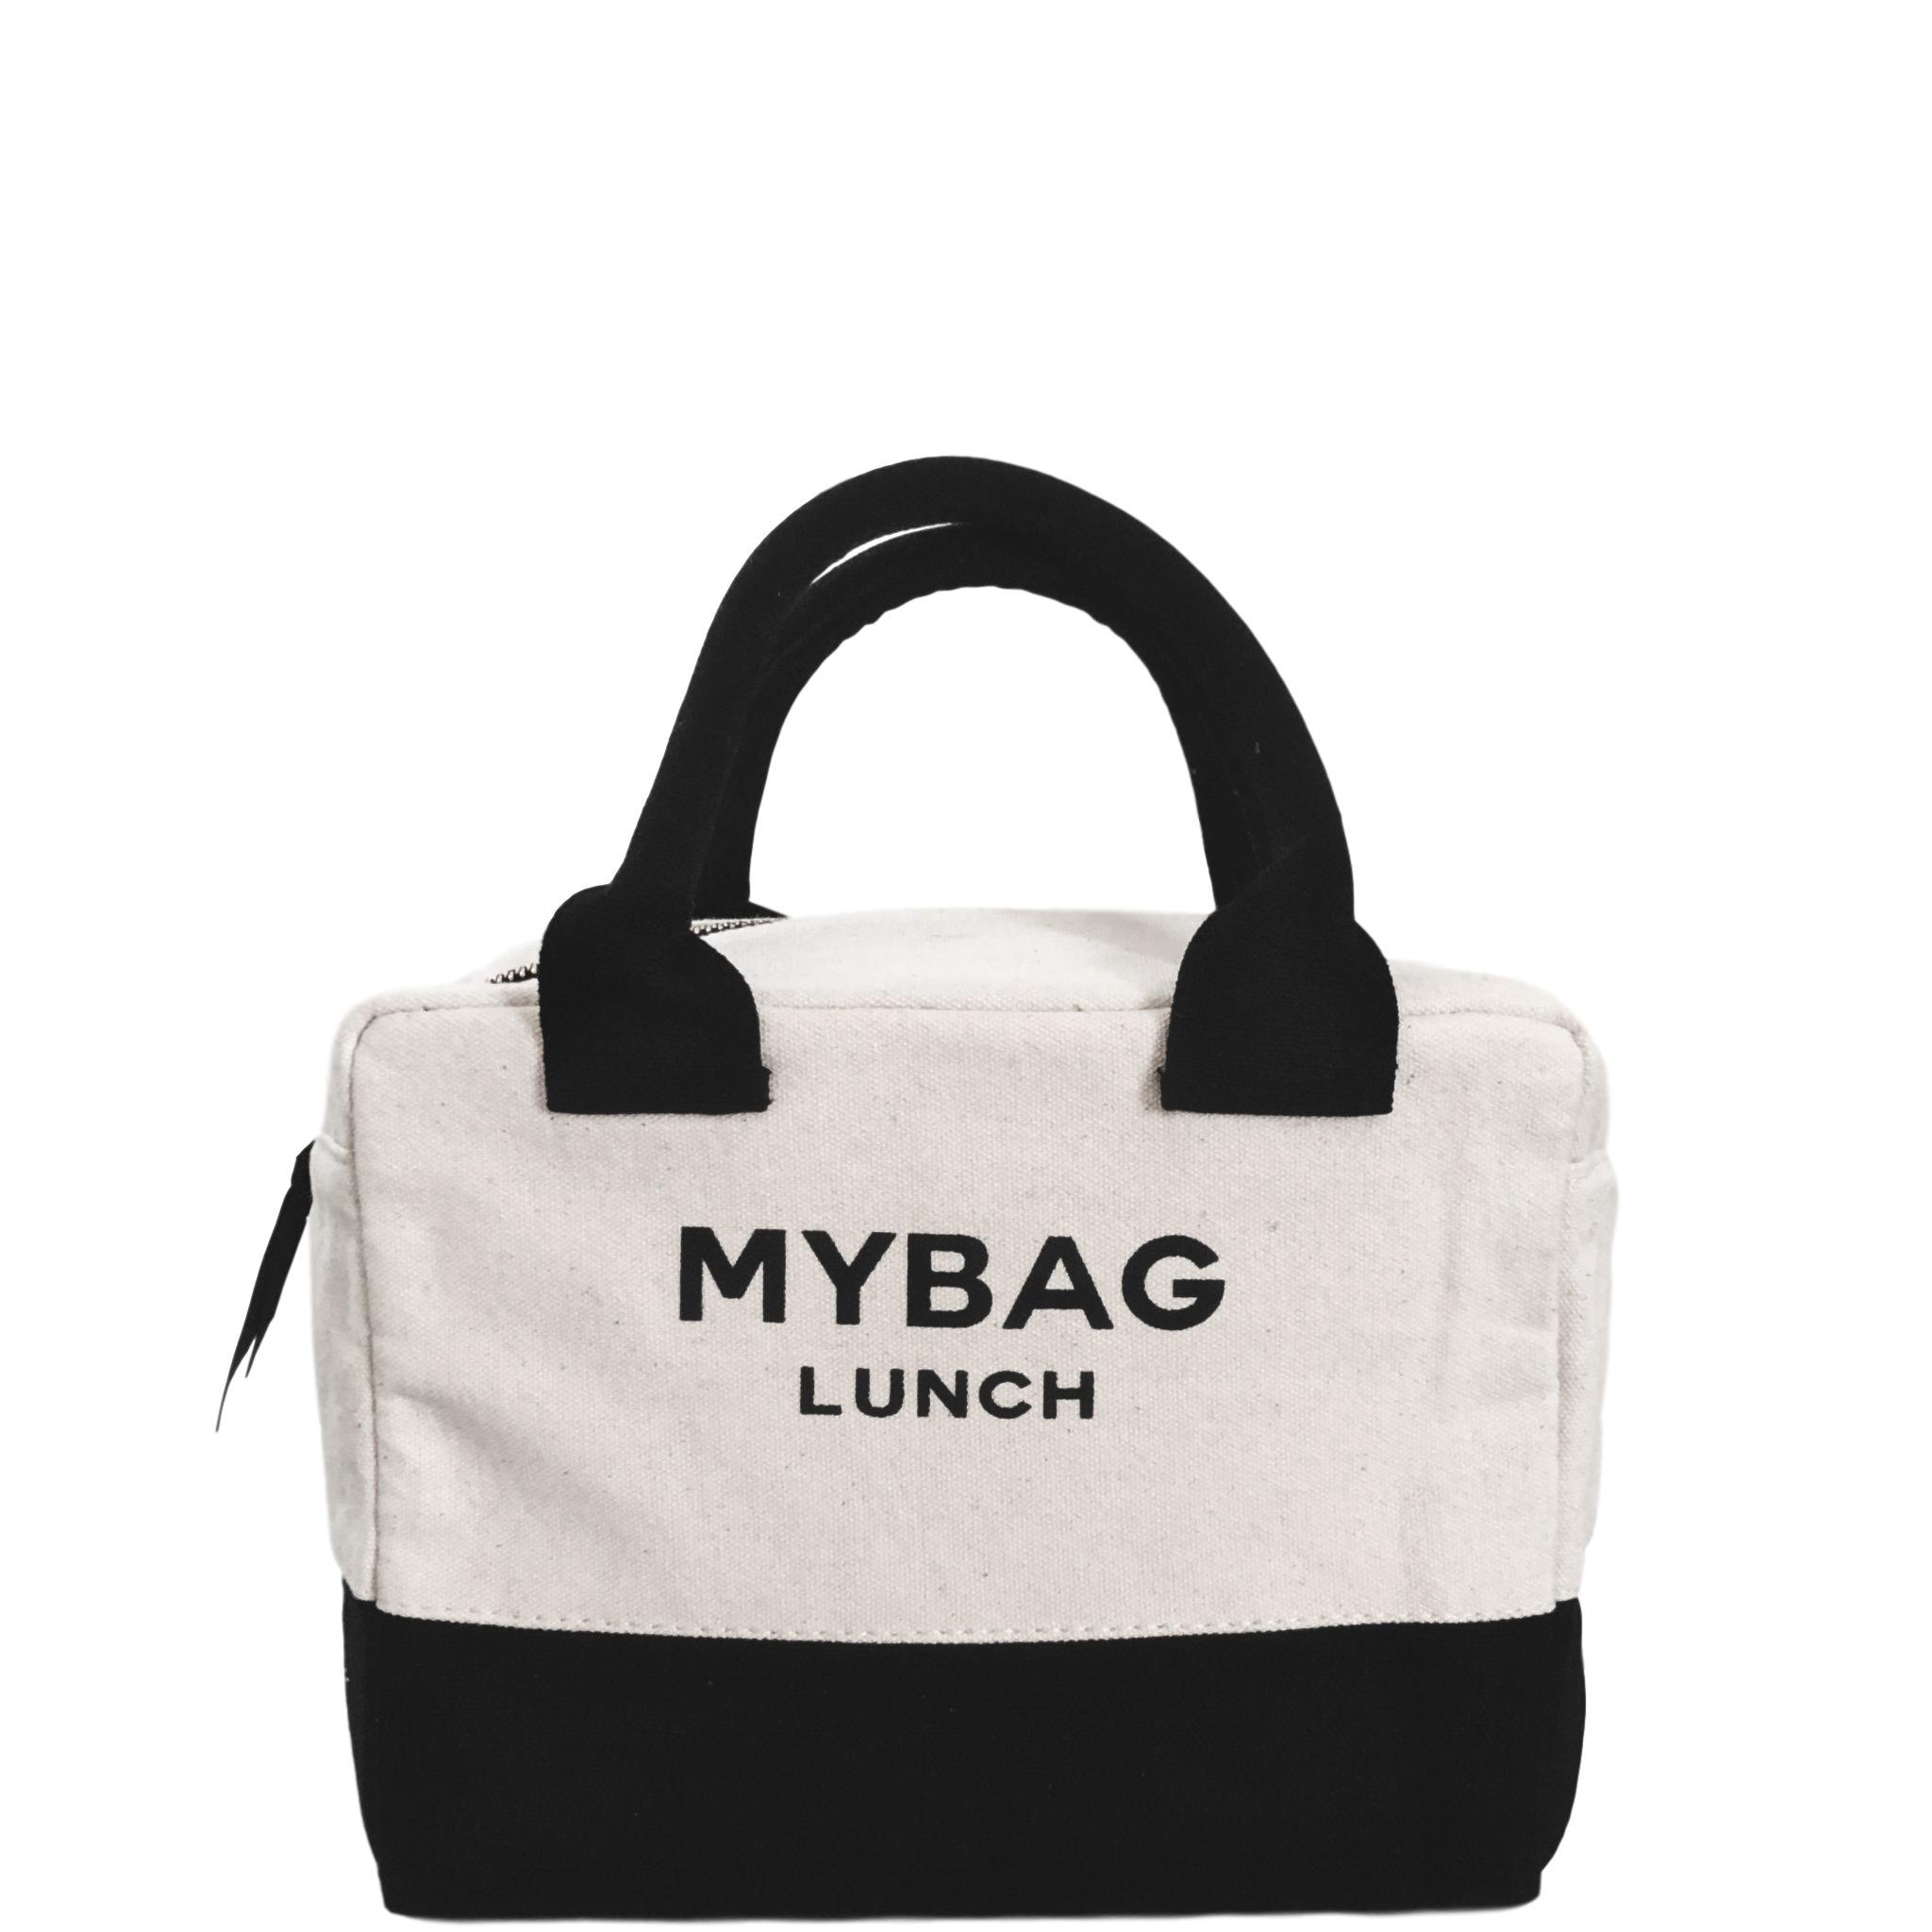 Lunch Bag for Women Insulated Lunch Box with Pockets Durable and Small  Lunch Tote Bag for Work and Picnic (White Stripe)